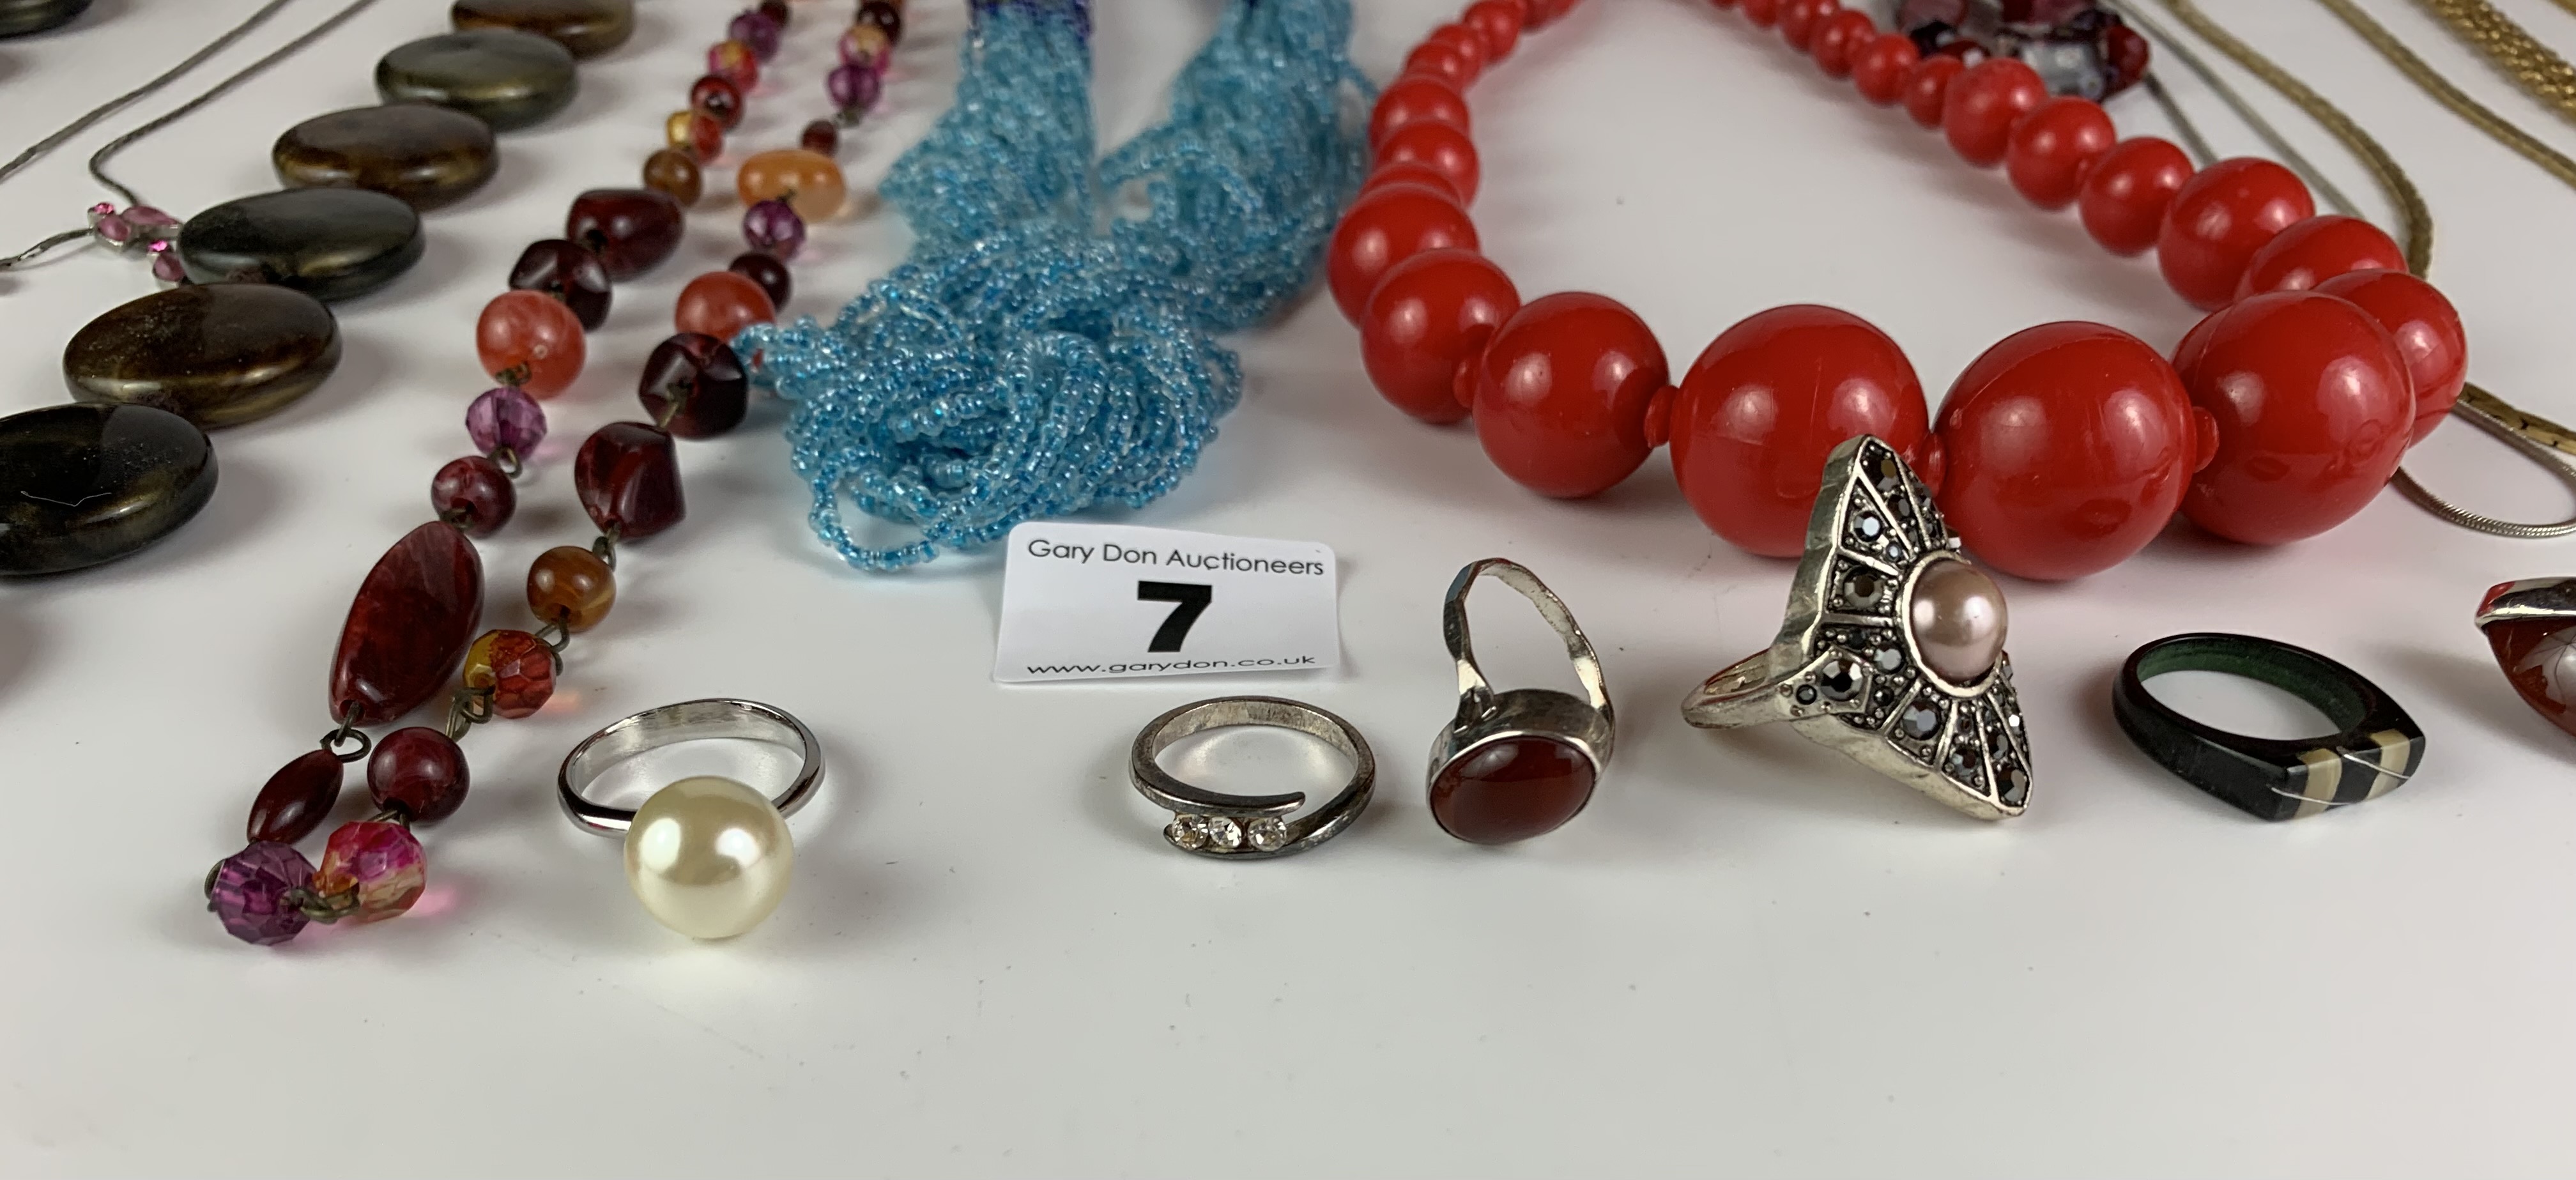 Dress jewellery including necklaces, beads, bracelets, rings etc. - Image 13 of 14